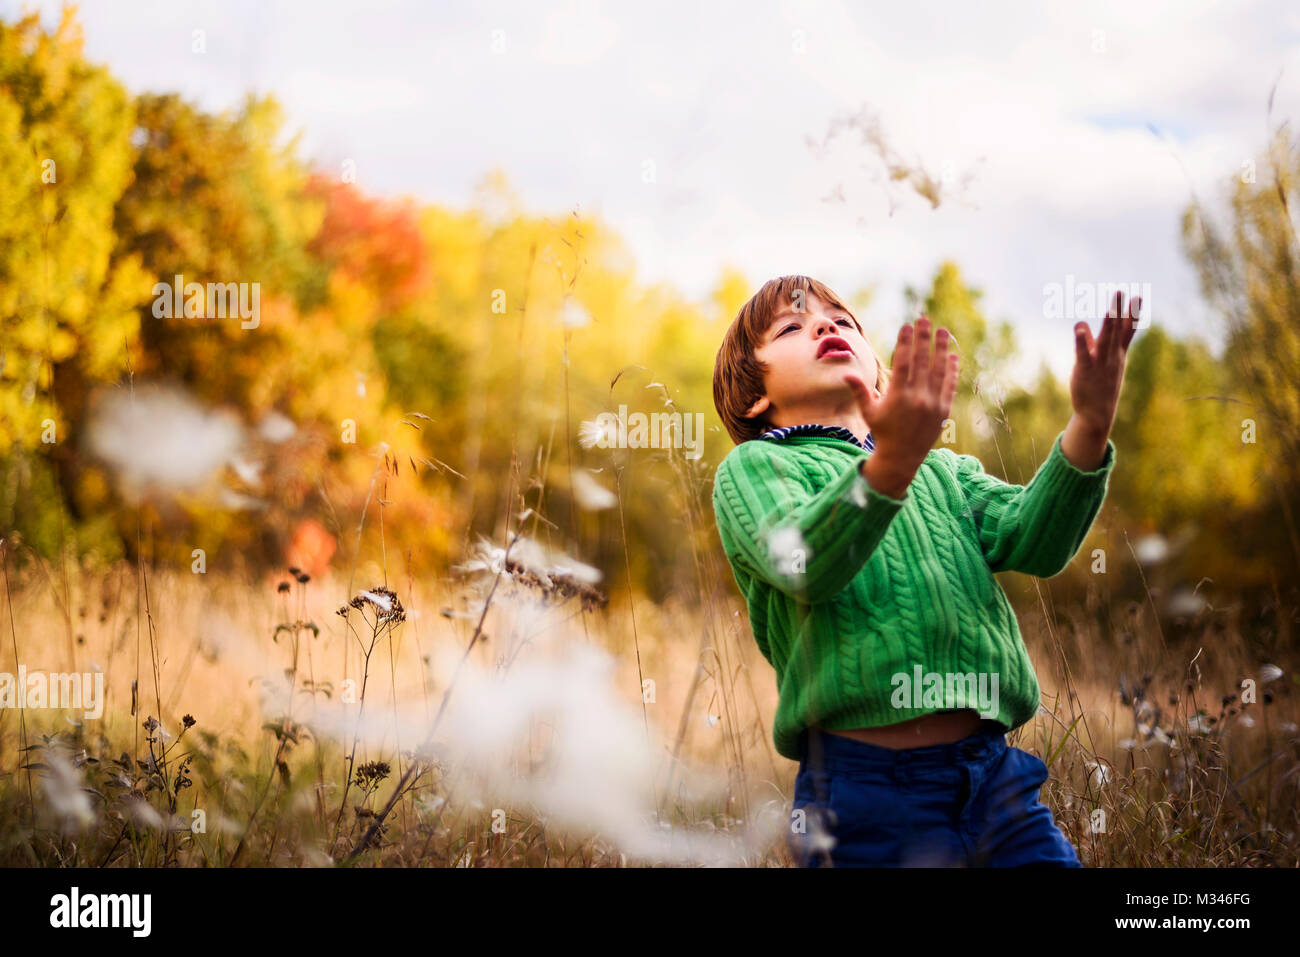 Boy standing in a field throwing milkweed flowers in the air Stock Photo